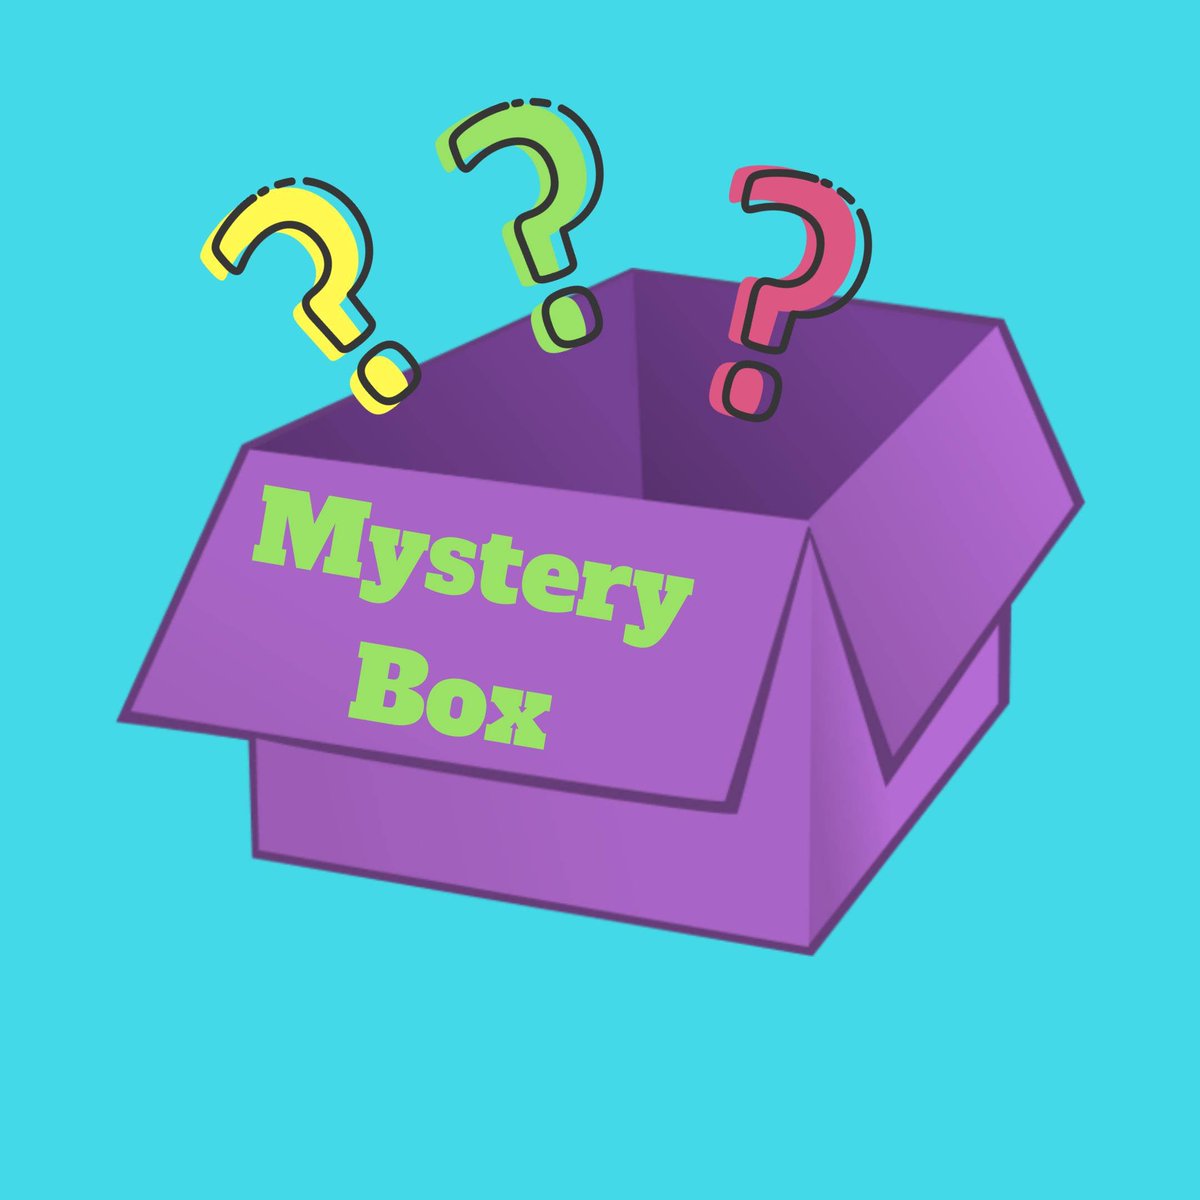 Check out this mystery box in my #etsy shop: Mystery Box - Beauty, Accessories and More! etsy.me/2LBmg1c #bathandbeauty #mysterybox #selfcaregift #mindfulnessgifts #meaningfulgift #sendagift #spagift #cheerupgift #beautygift